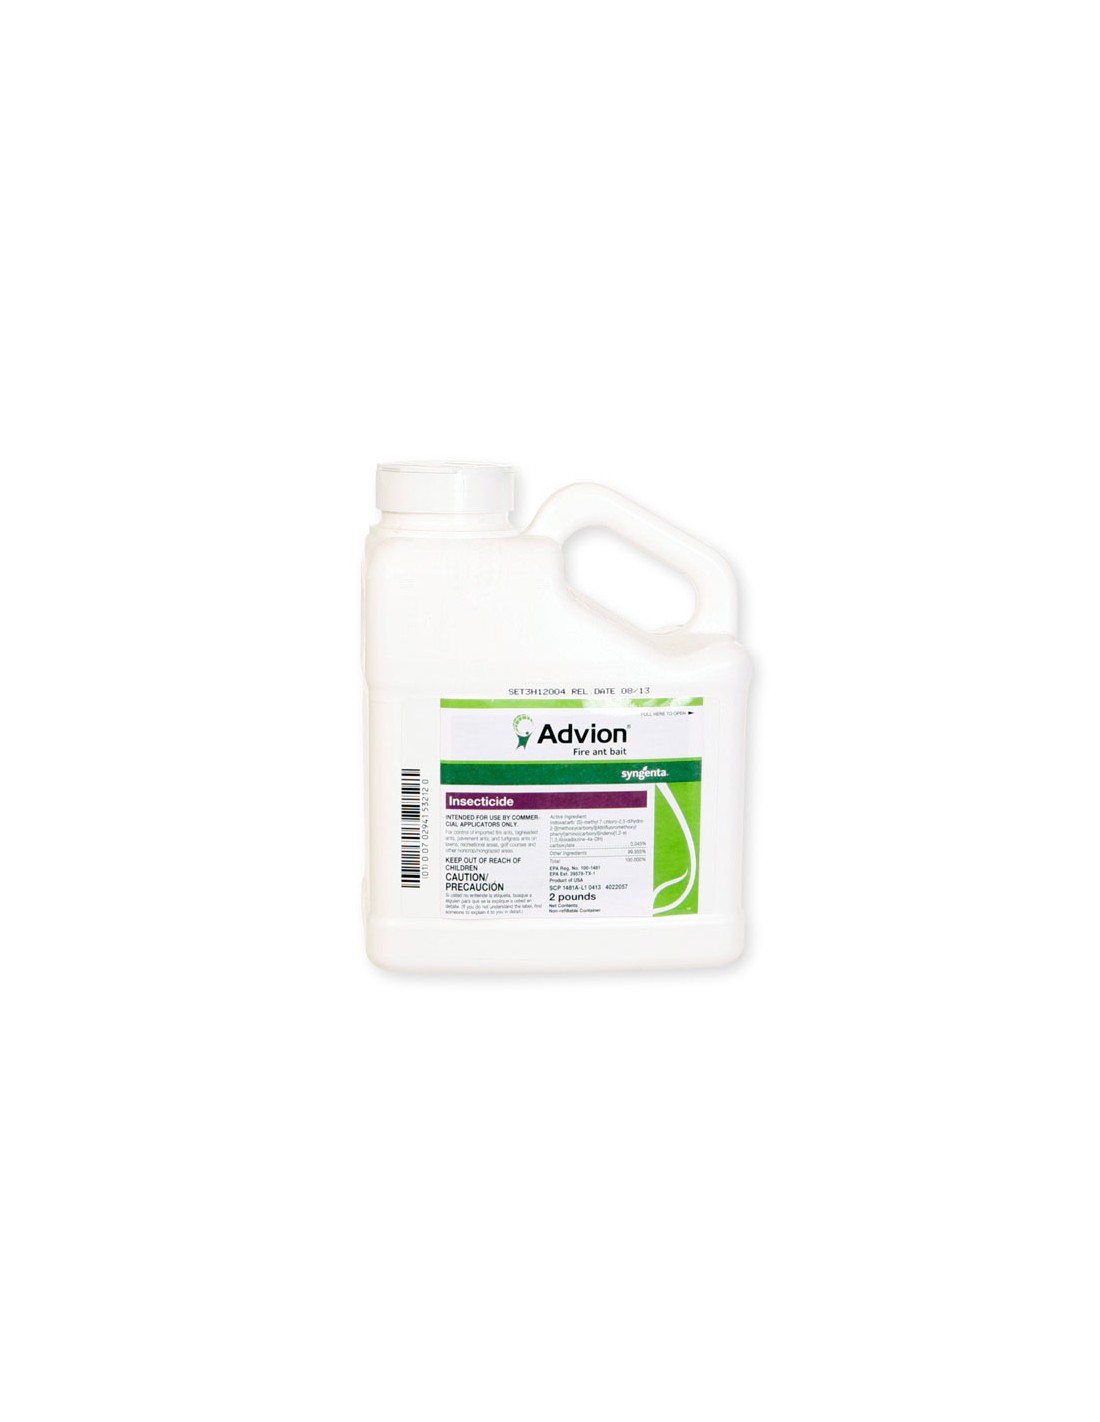 looking to buy advion fire ant killer